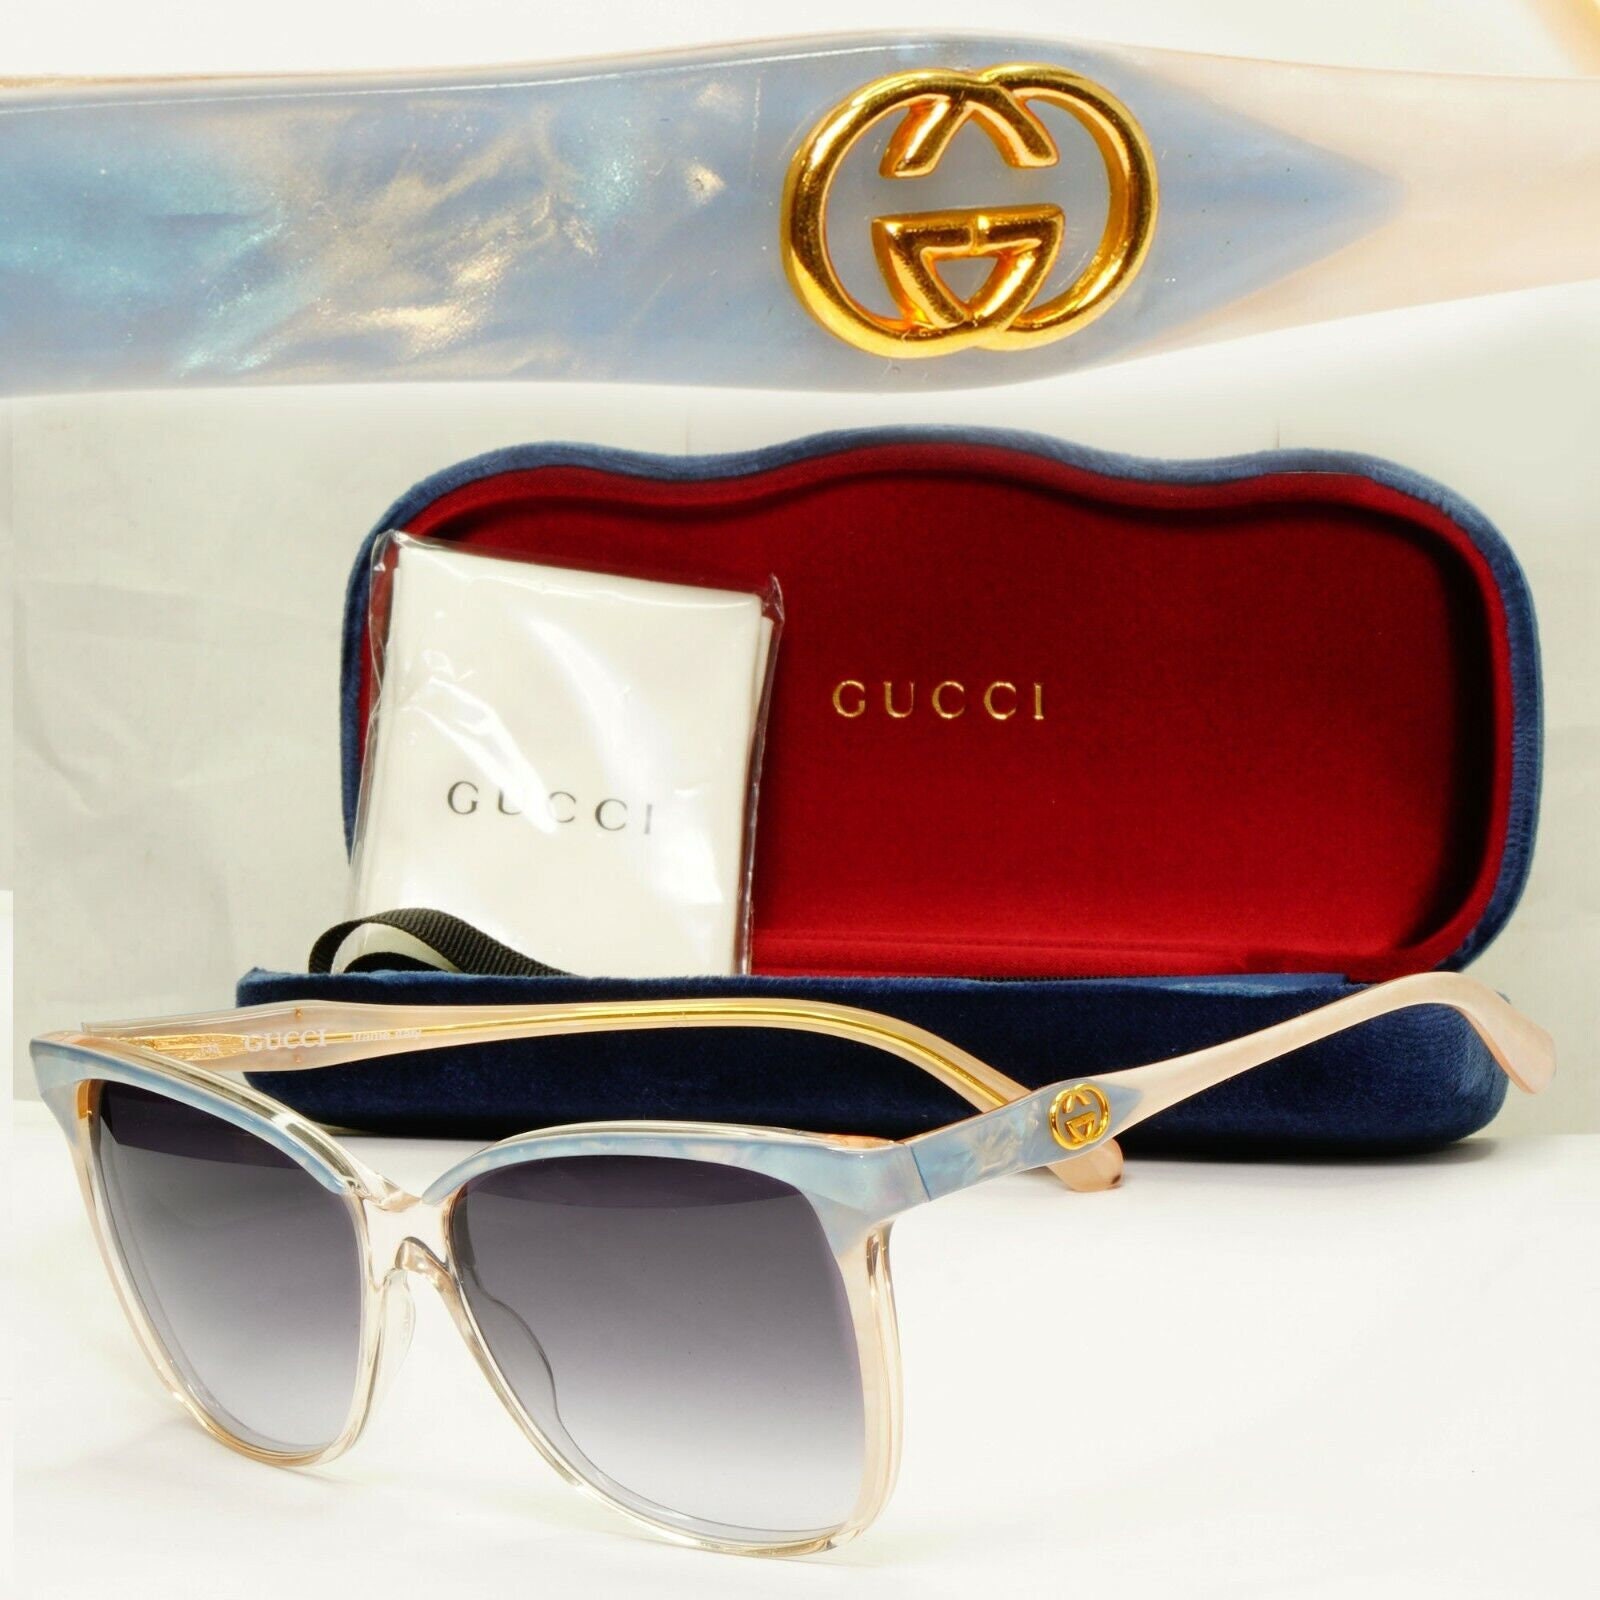 Kering Eyewear and Safilo renew Gucci manufacture and supply